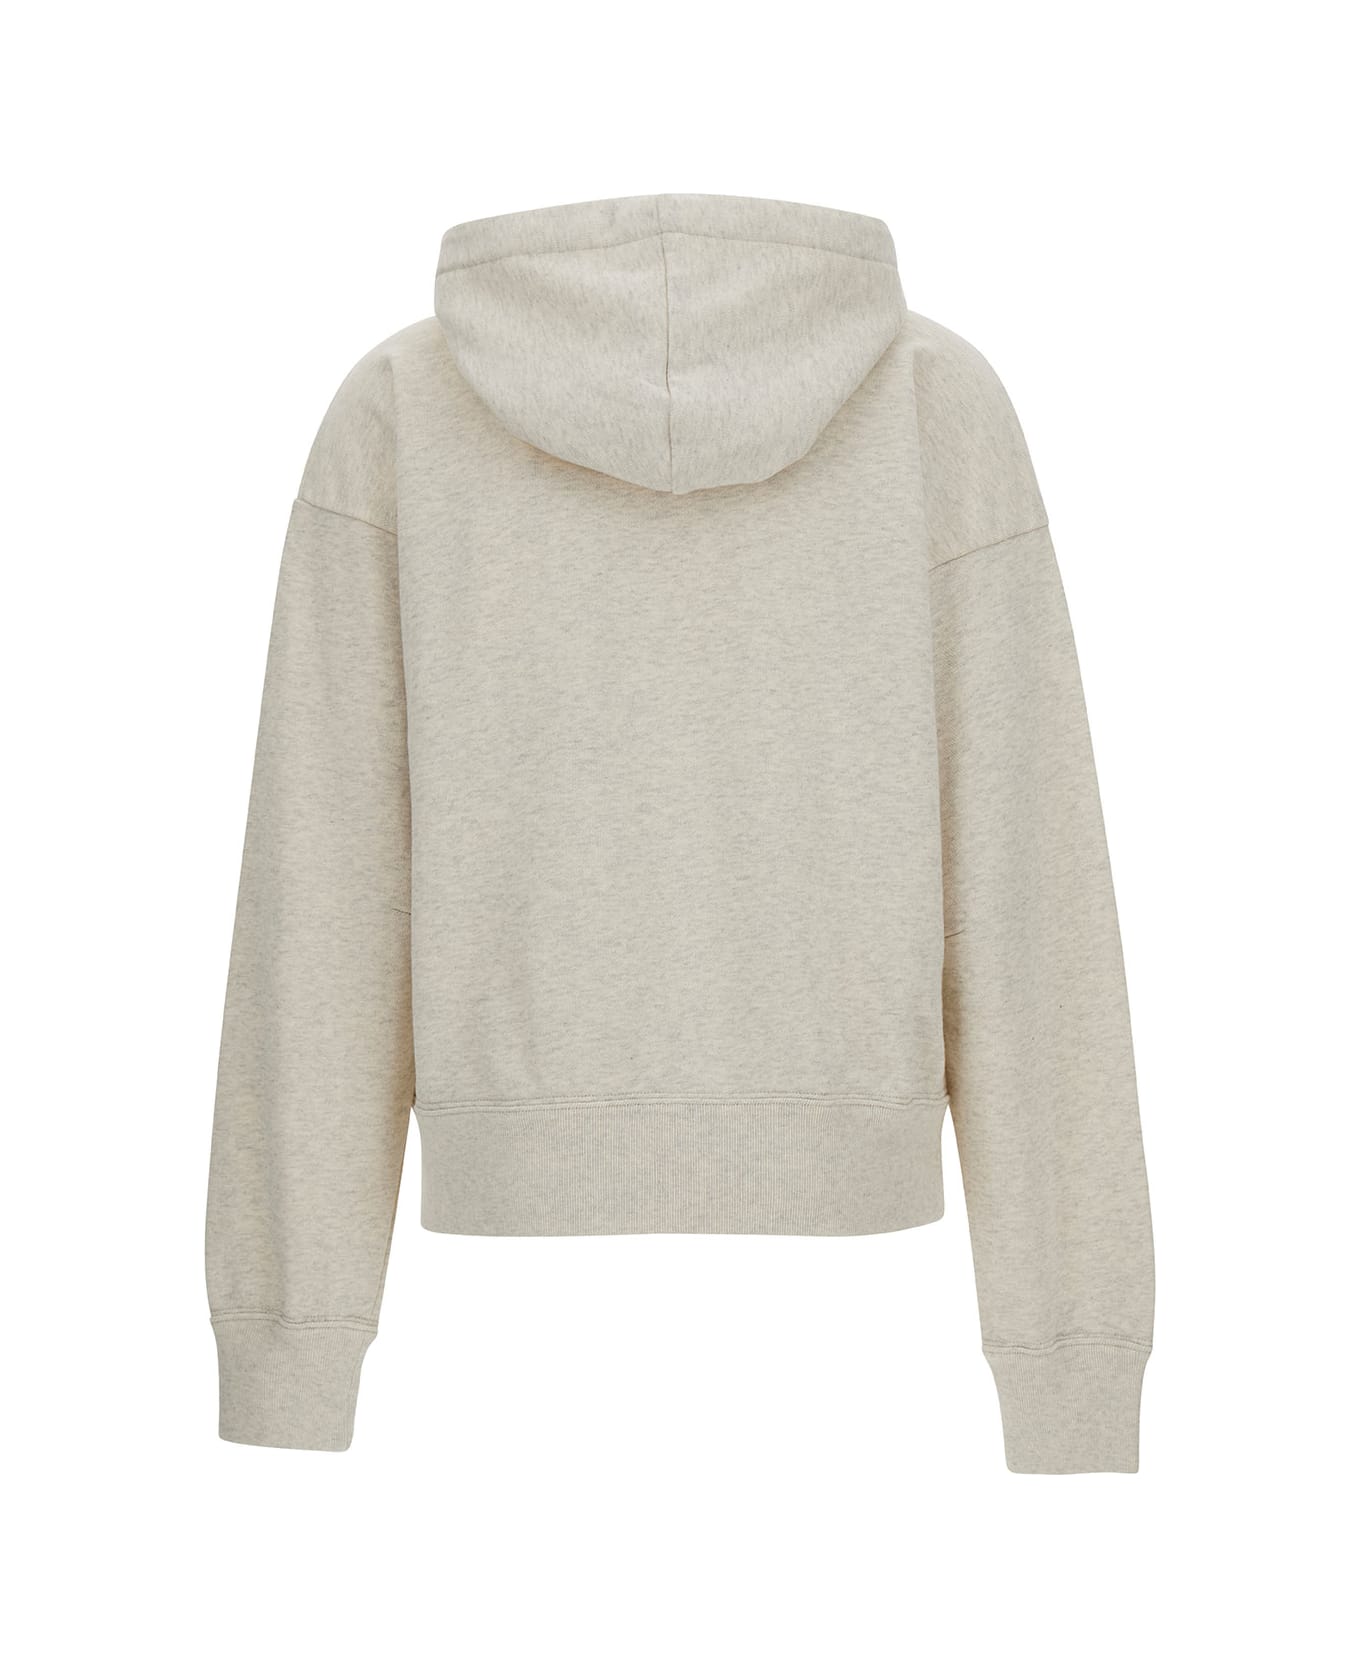 Isabel Marant Hoodie With Logo Embroidery - CIPRIA フリース